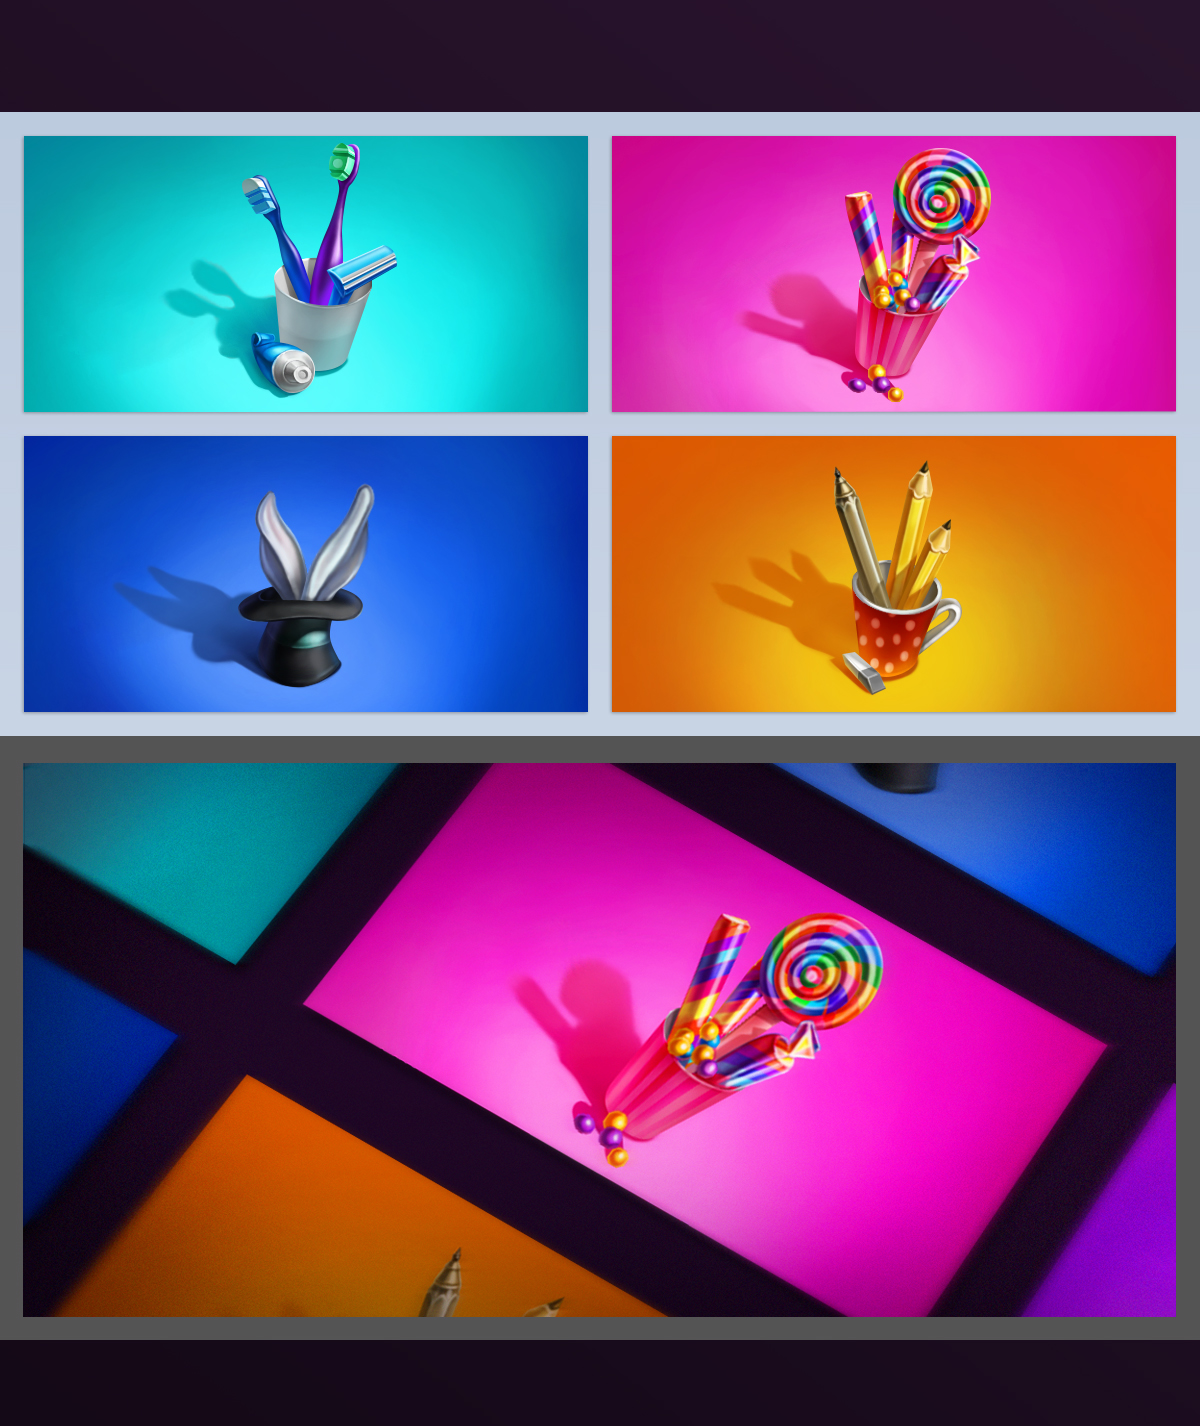 Candy pencil rabbit in the hat toothbrush icons